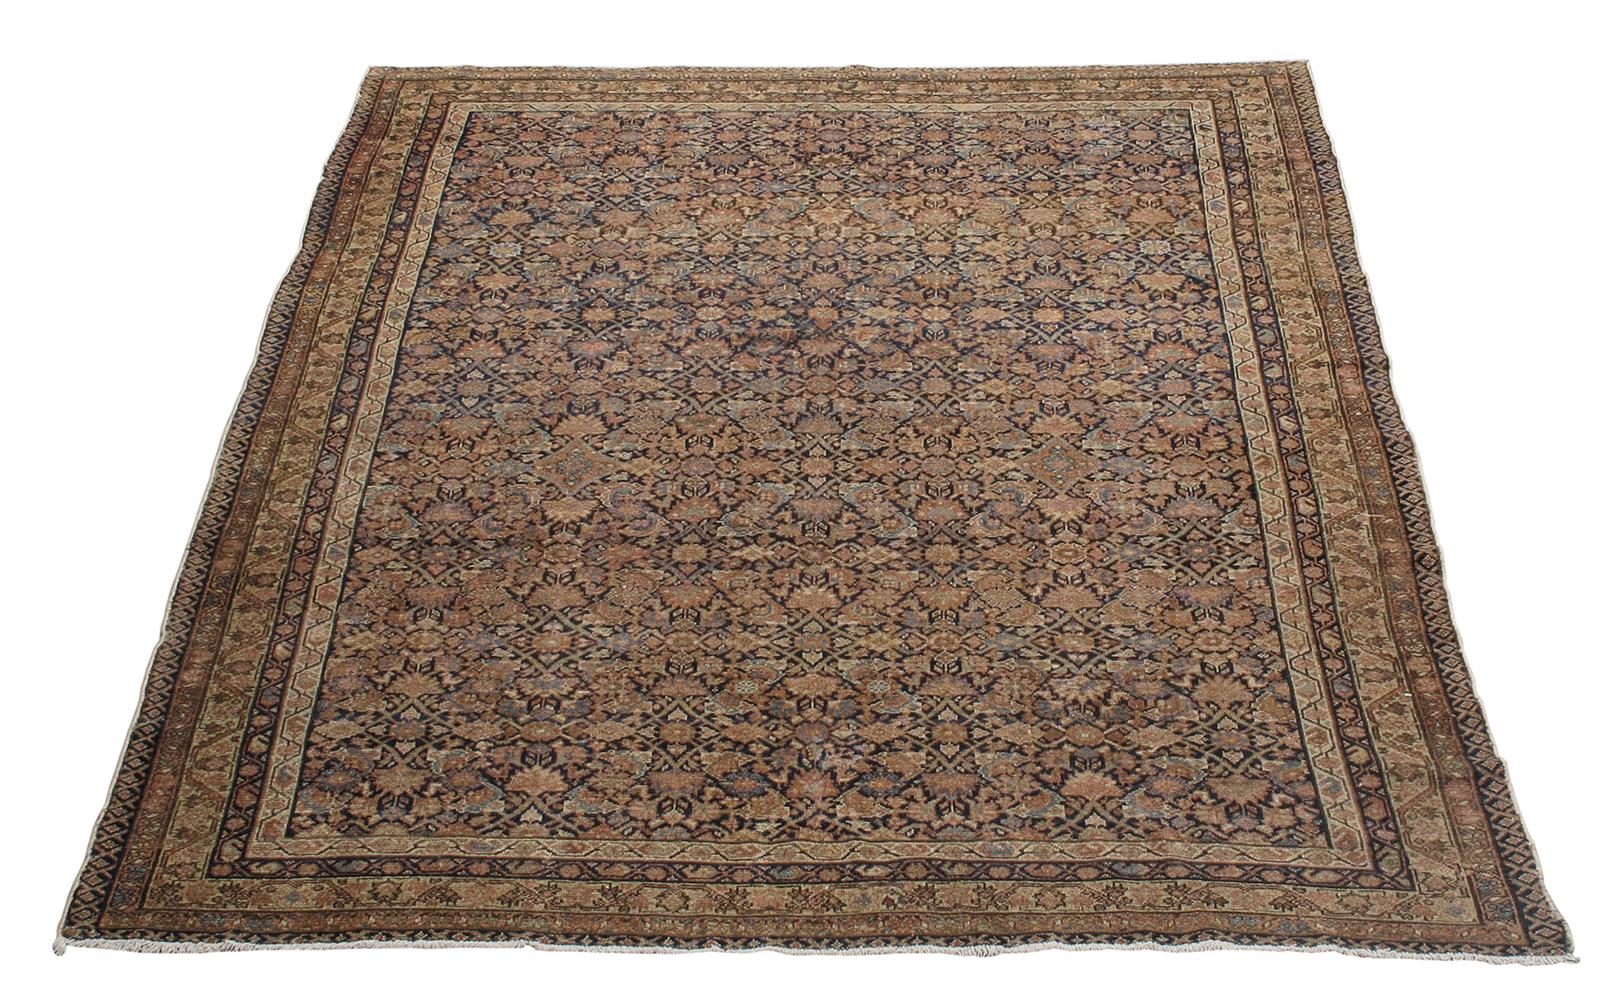 This antique Malayer rug is skillfully sourced by N A S I R I through extensive travel, passion, and research. Malayer rugs are named after a major rug weaving village in central west Iran. The village was known for producing extremely Fine rugs in